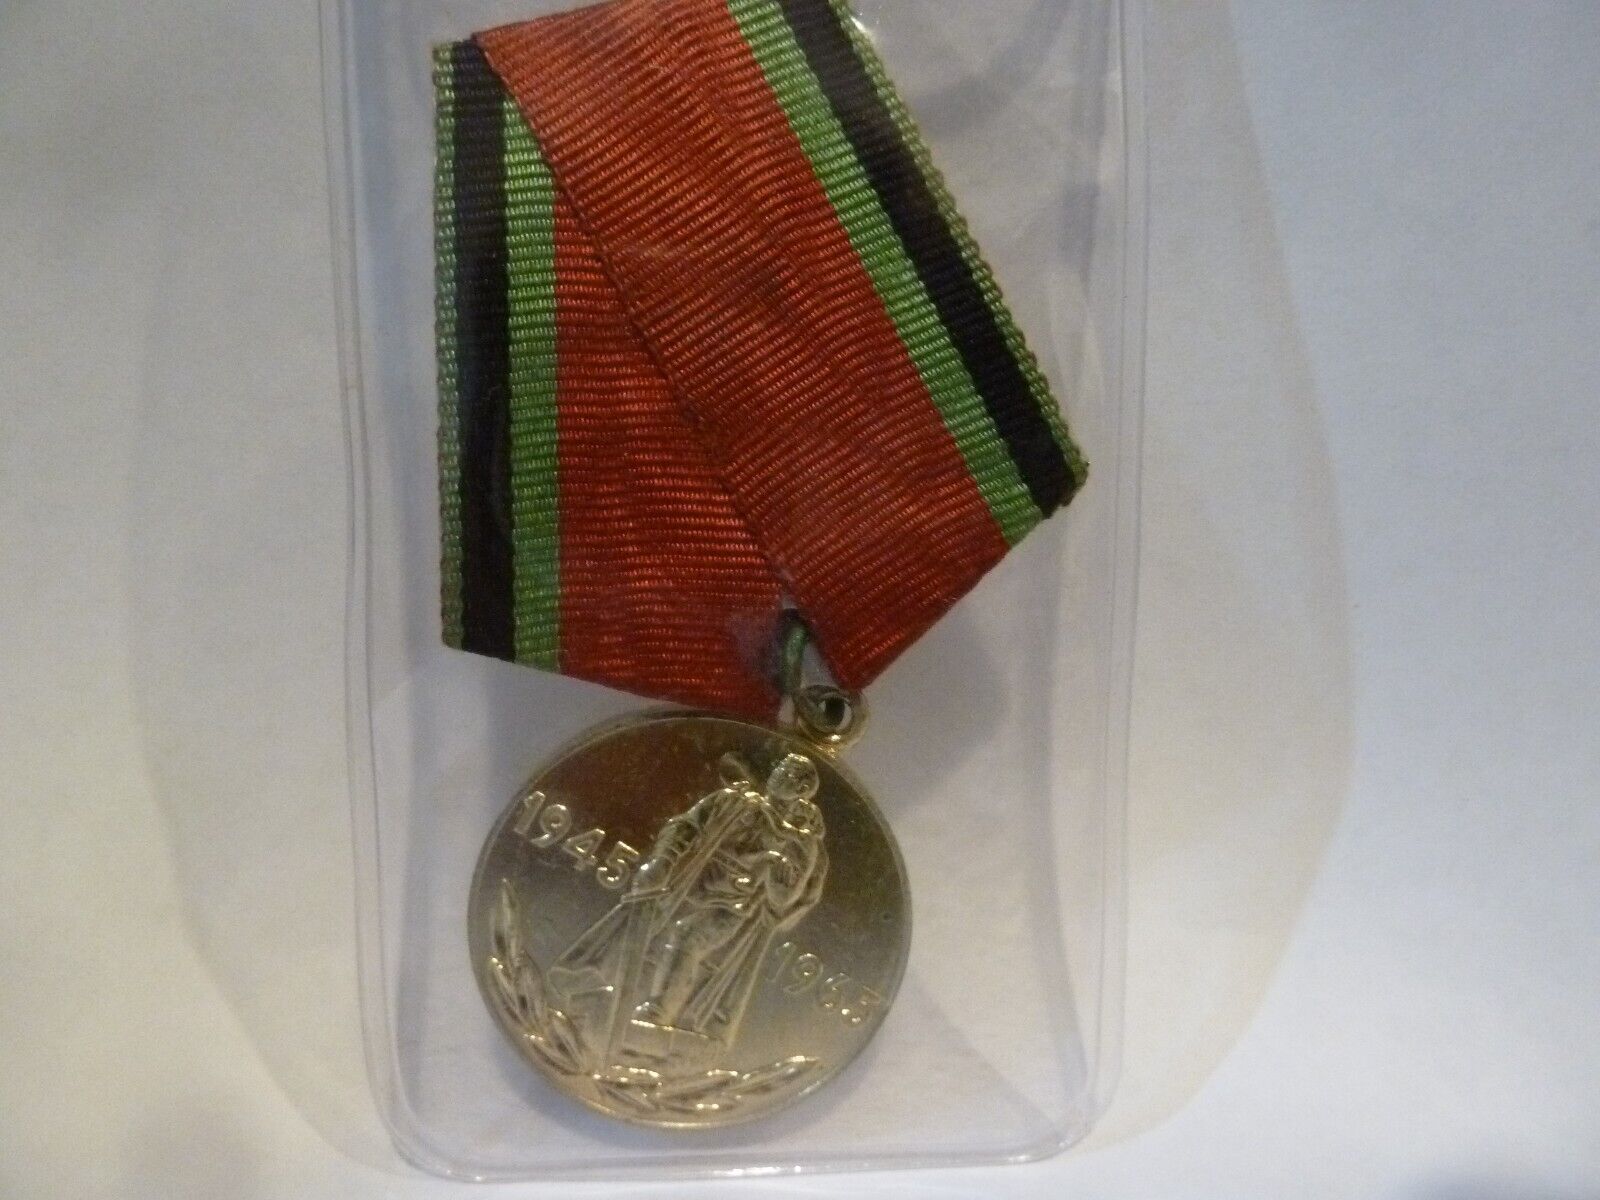 Medallion Medal Ribbon Pin Gold 1945 1965 estate sale find USSR Russian WWII